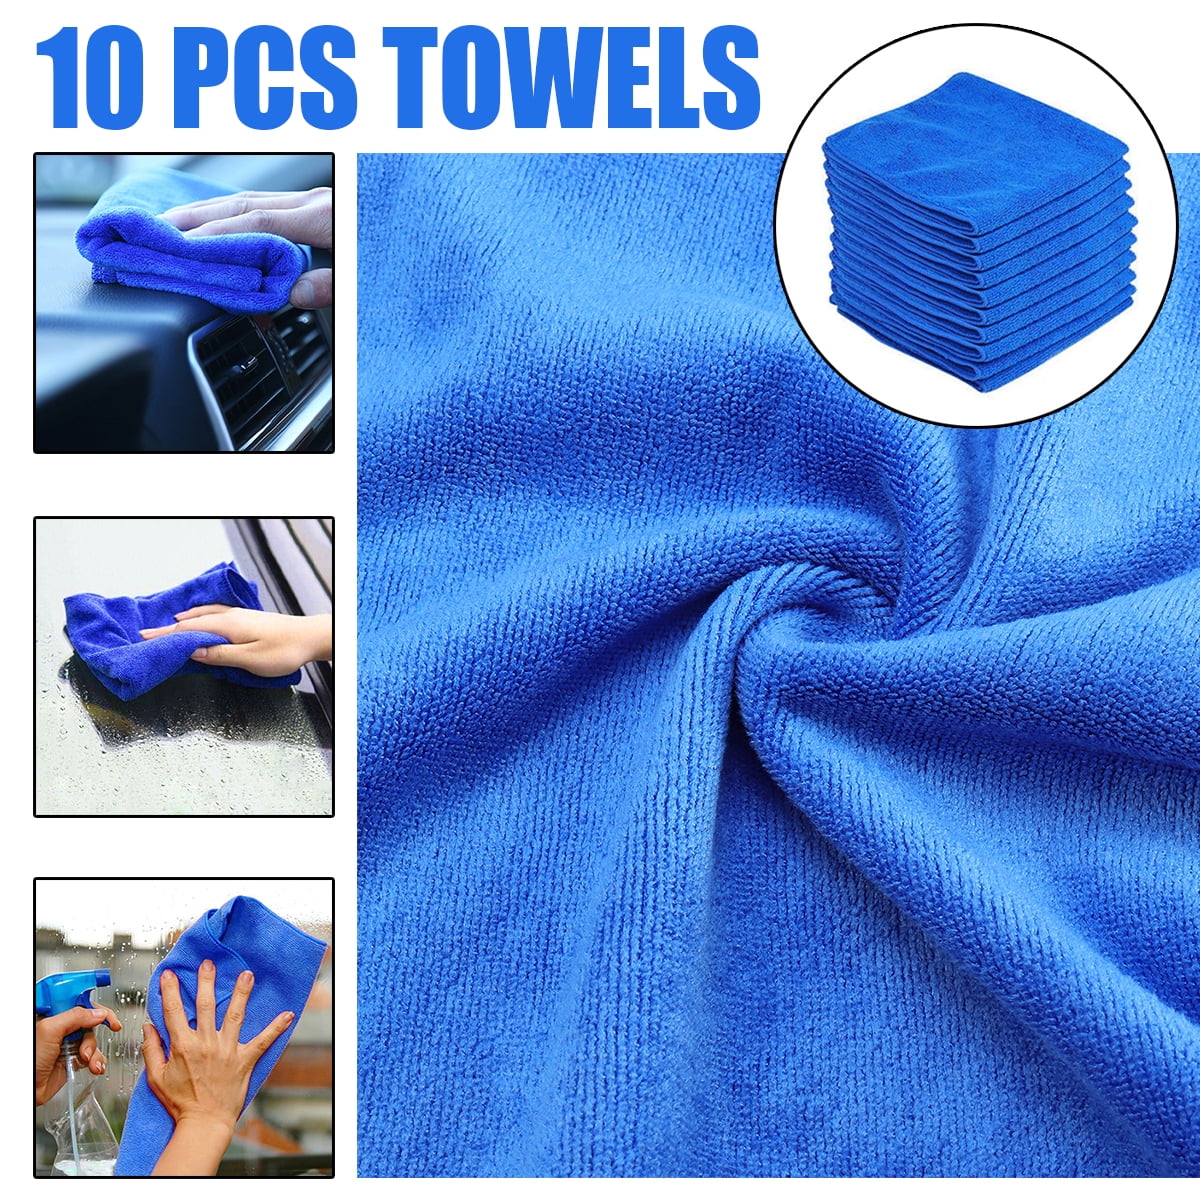 Microfiber Cleaning Cloth Towel Absorbent No Scratch Polishing Detailing Rags.